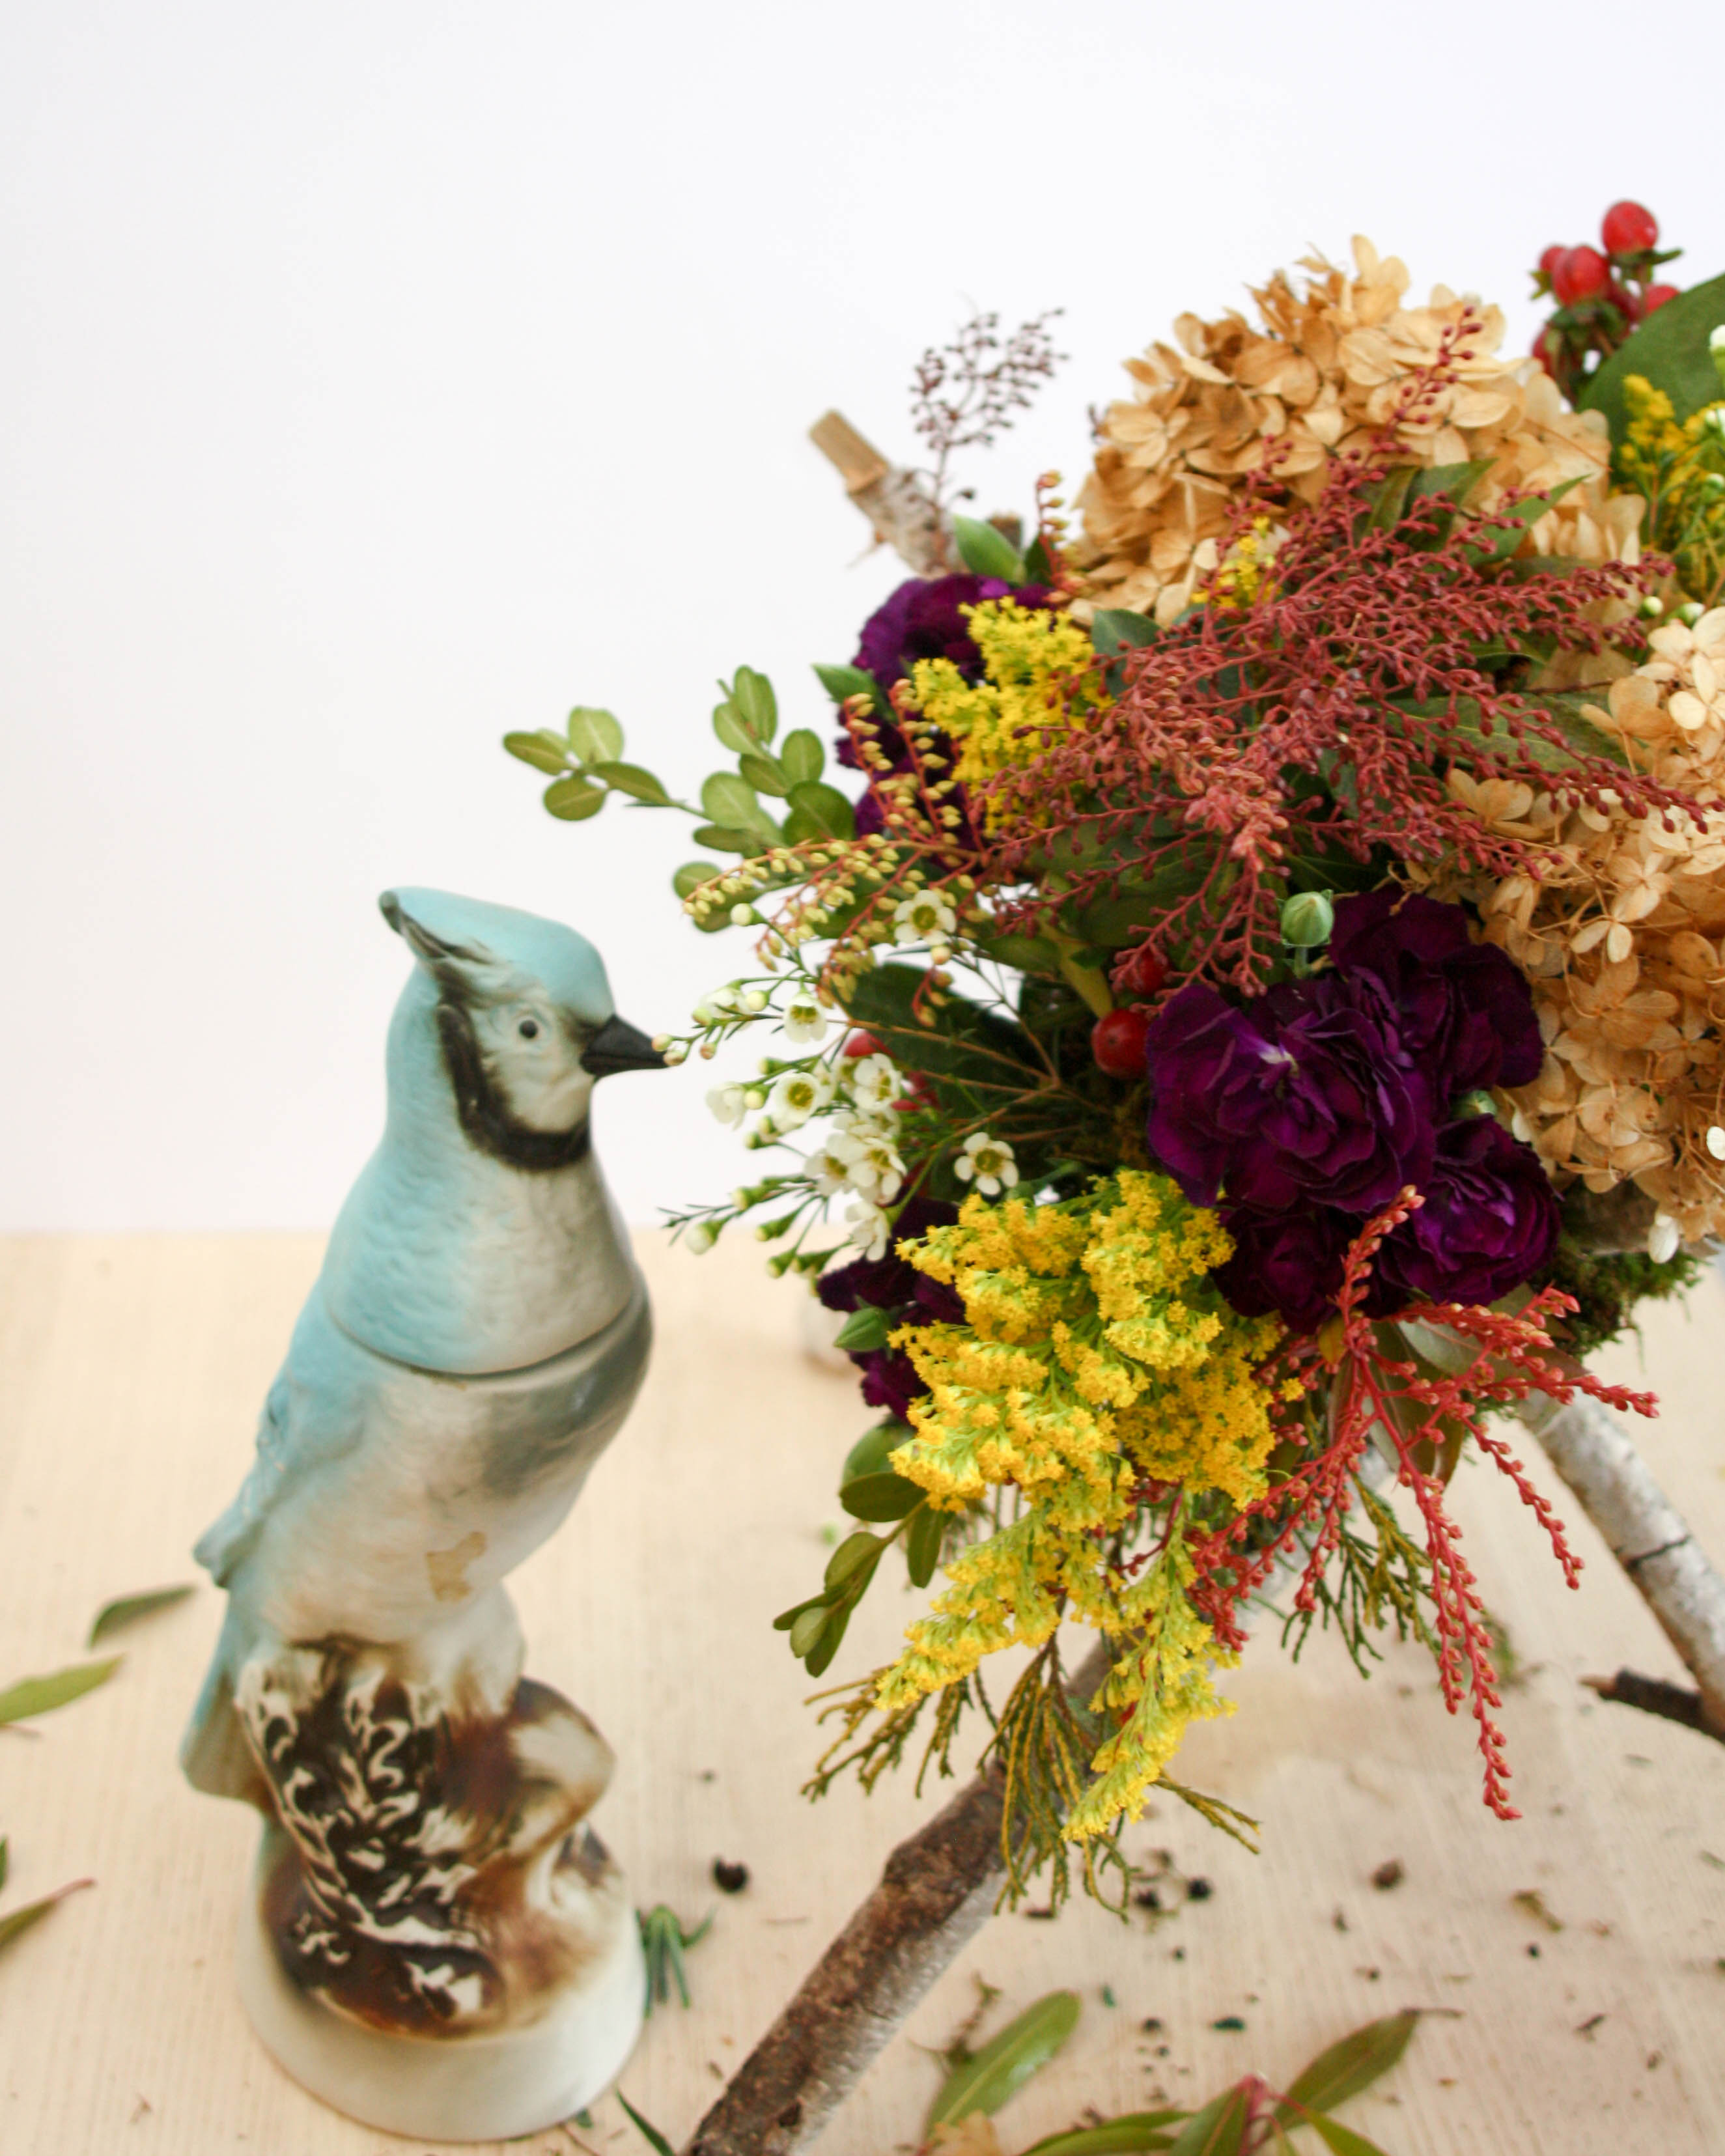 A vase with flowers and a bird on it.